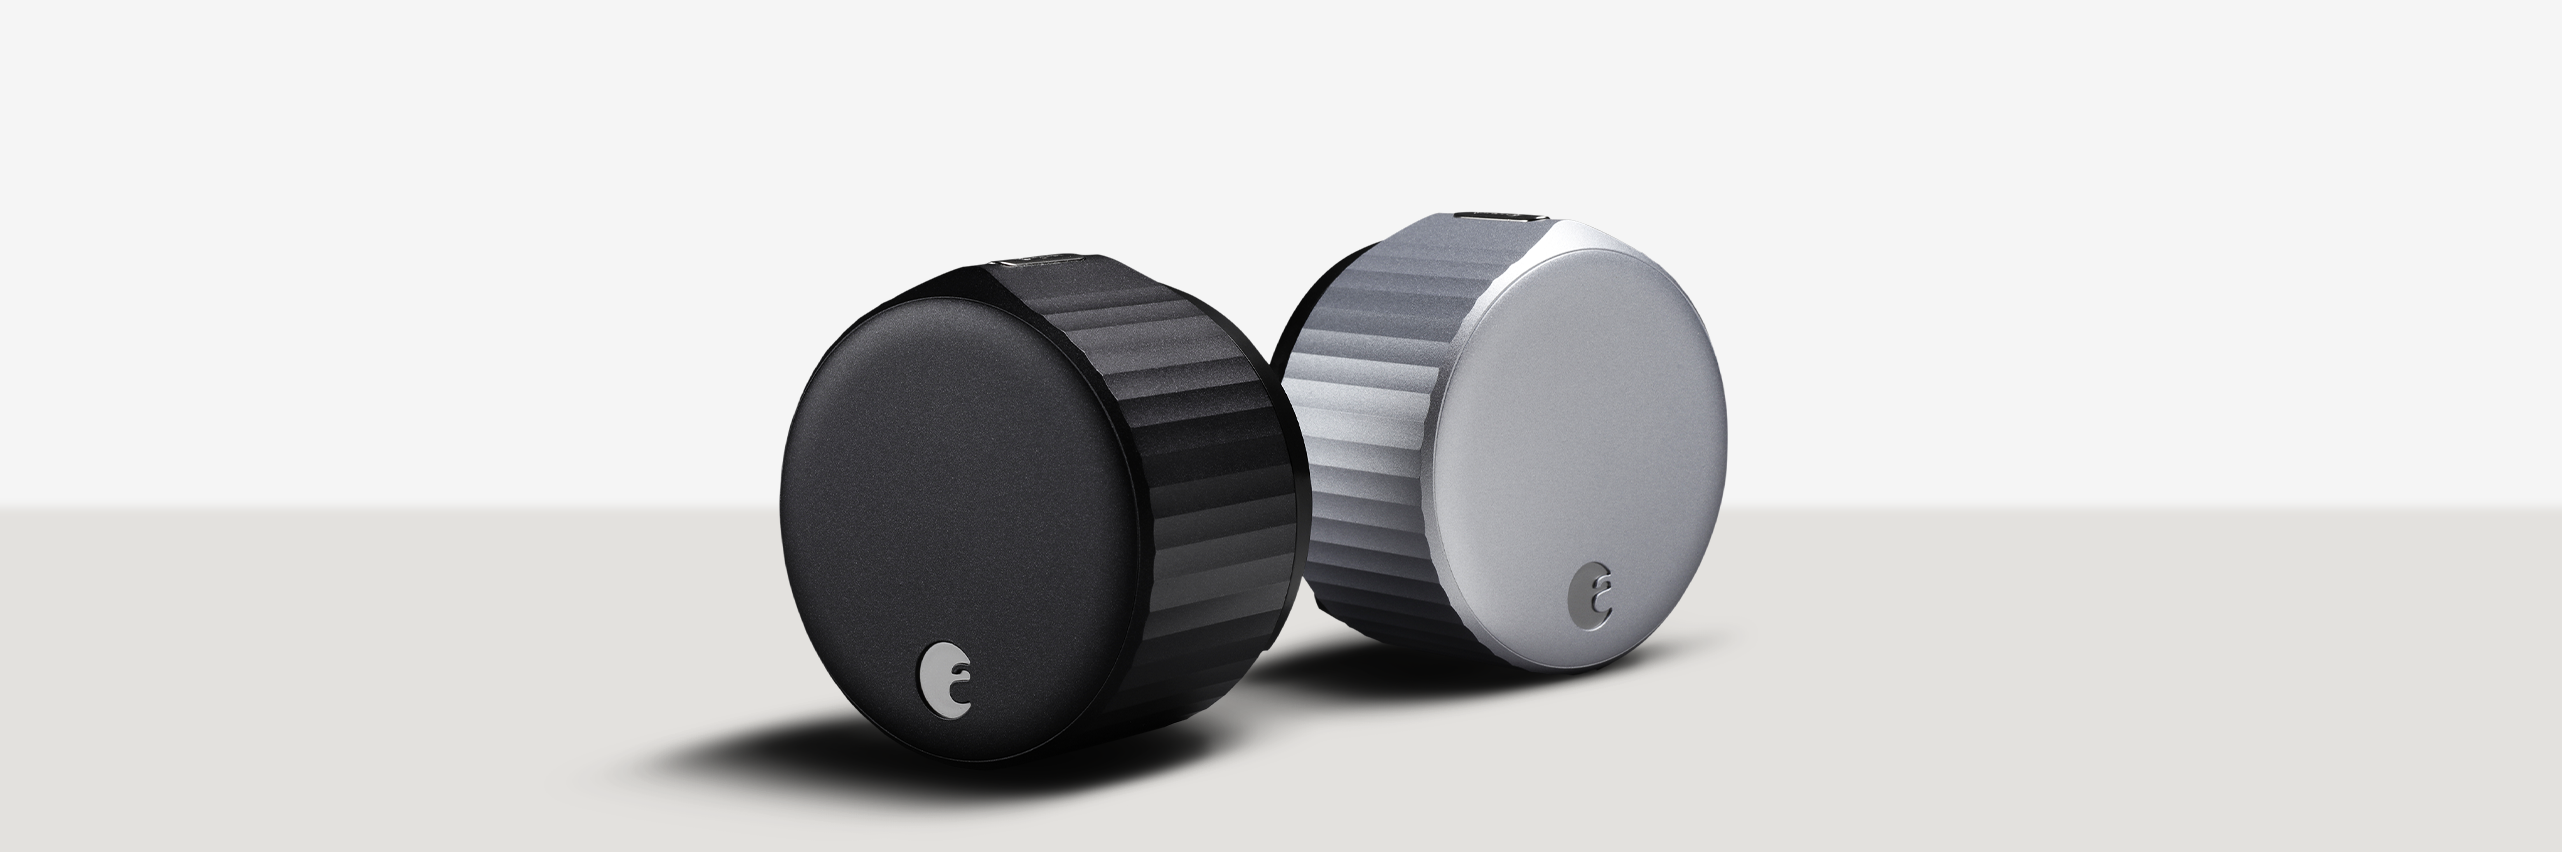 The August Wi-Fi Smart Lock is depicted as the best smart lock